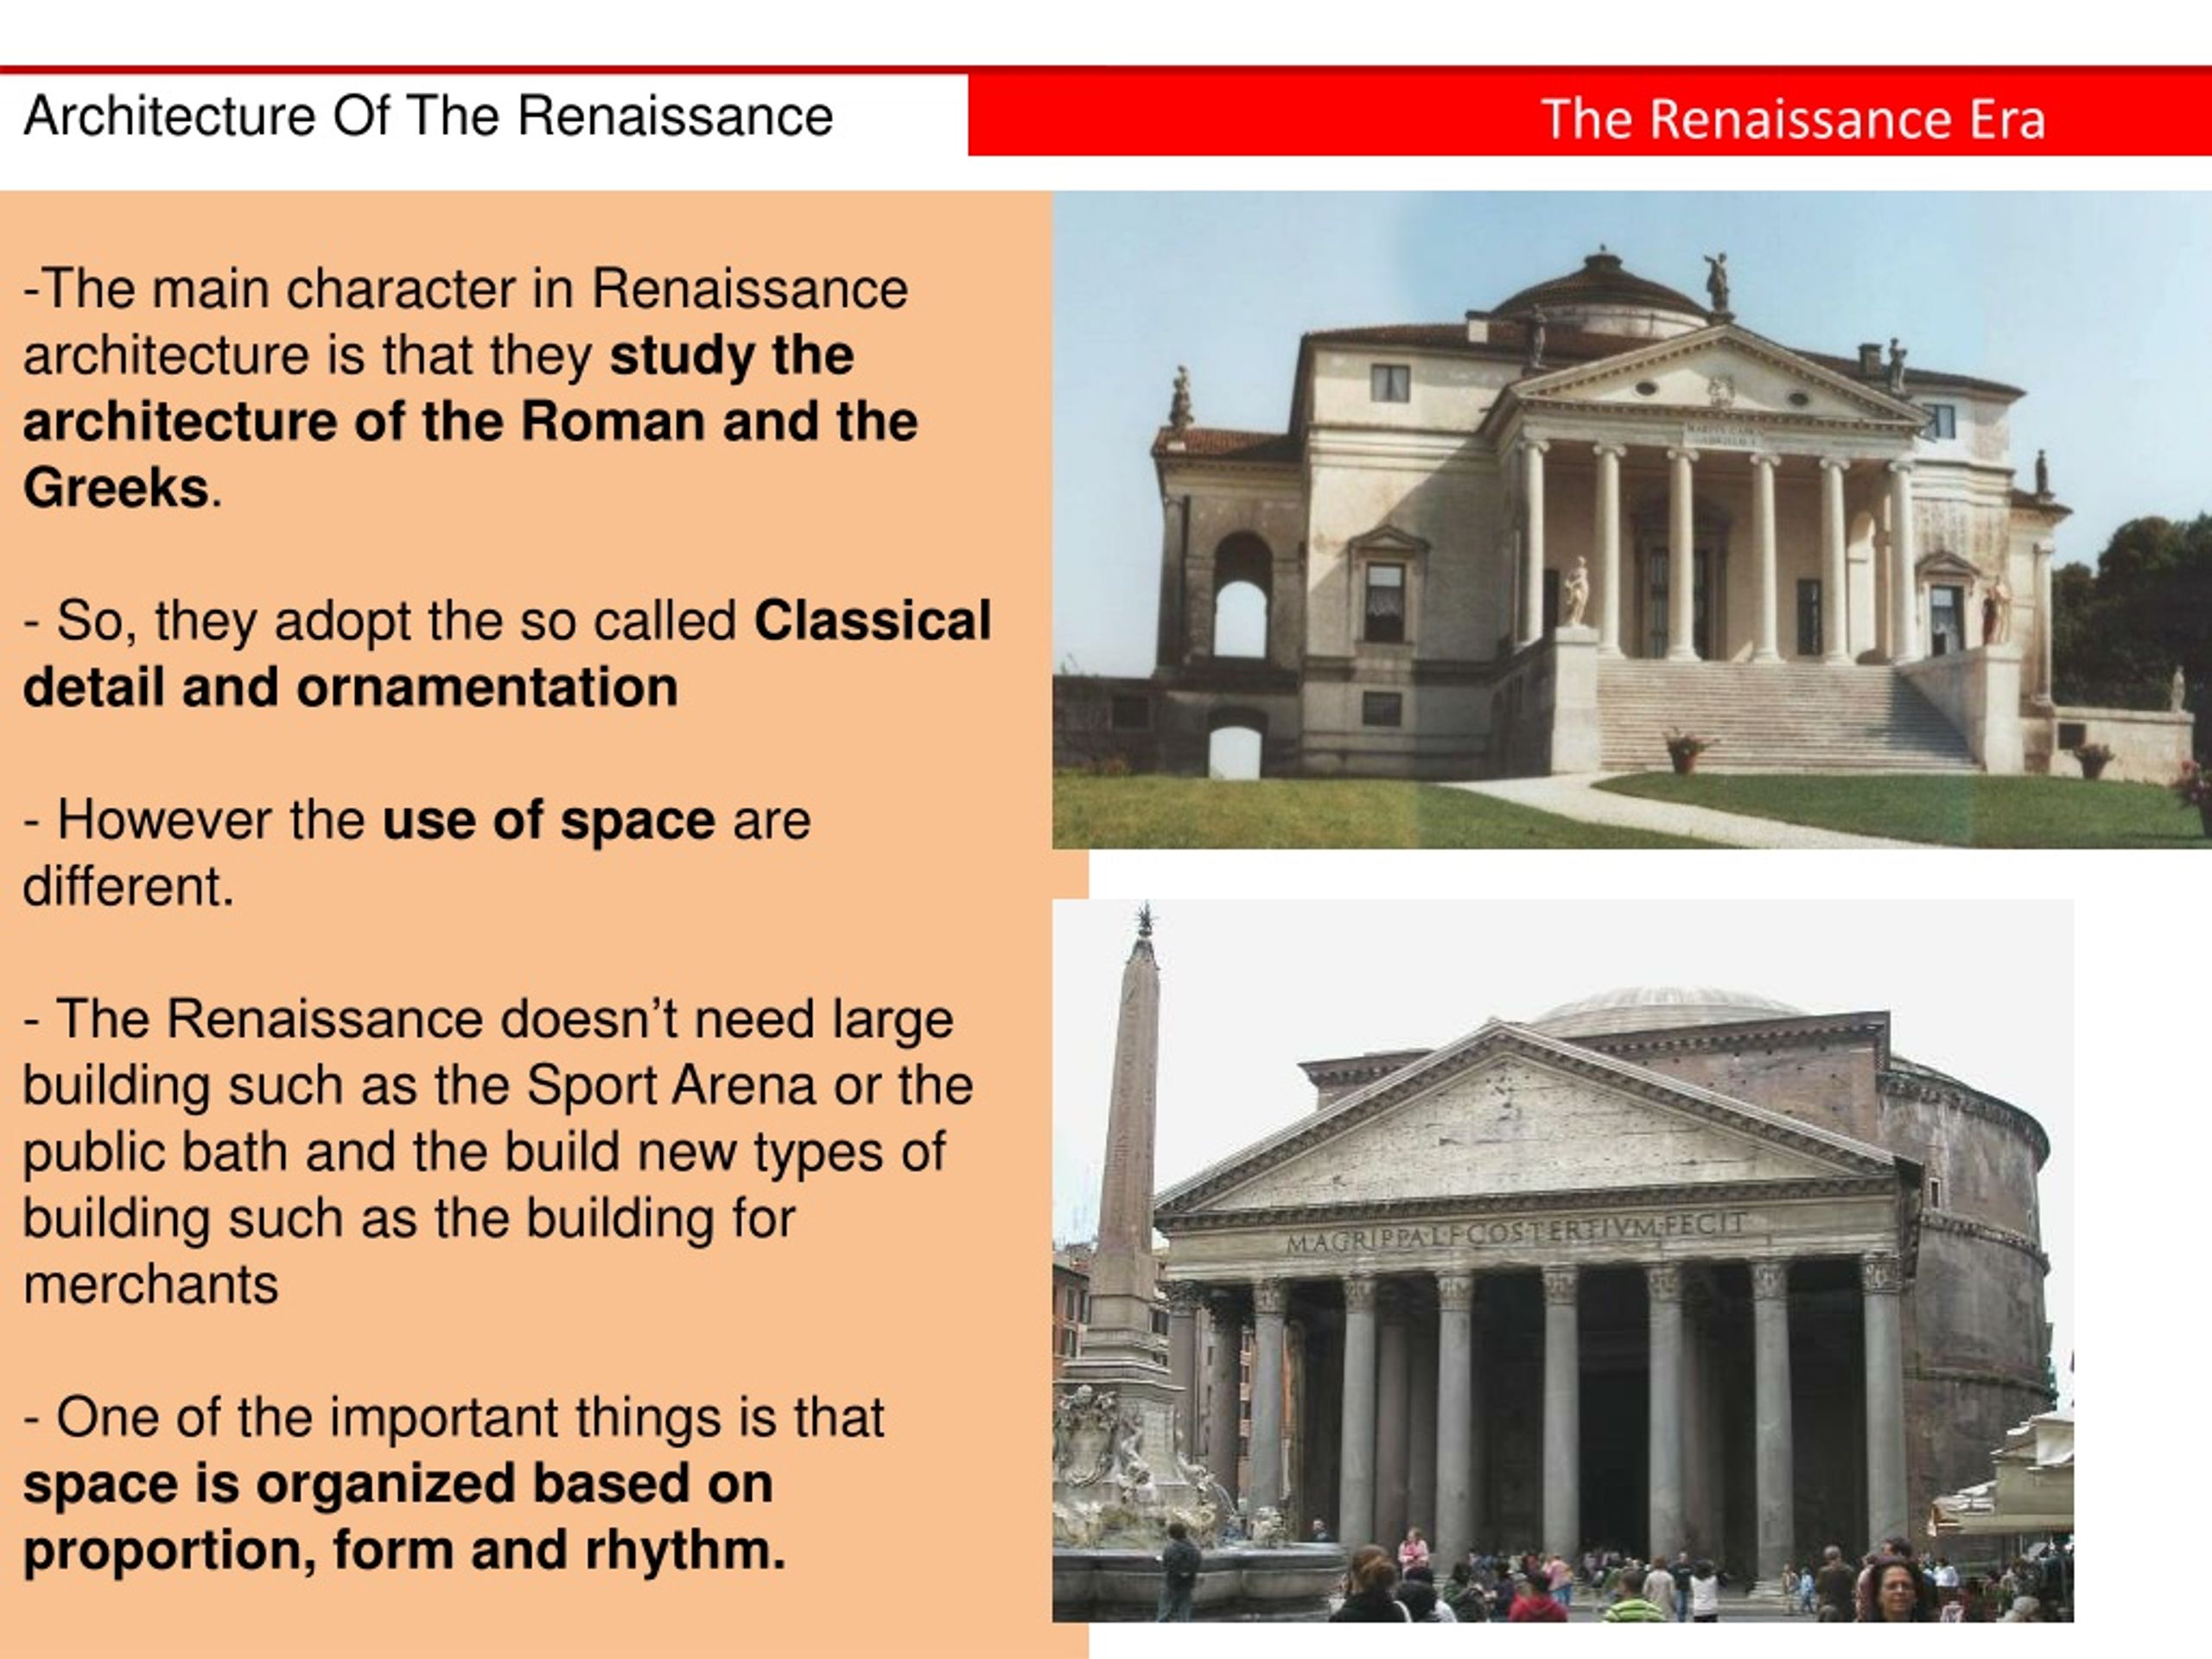 PPT ARCHITECTURE OF THE EARLY RENAISSANCE PowerPoint Presentation